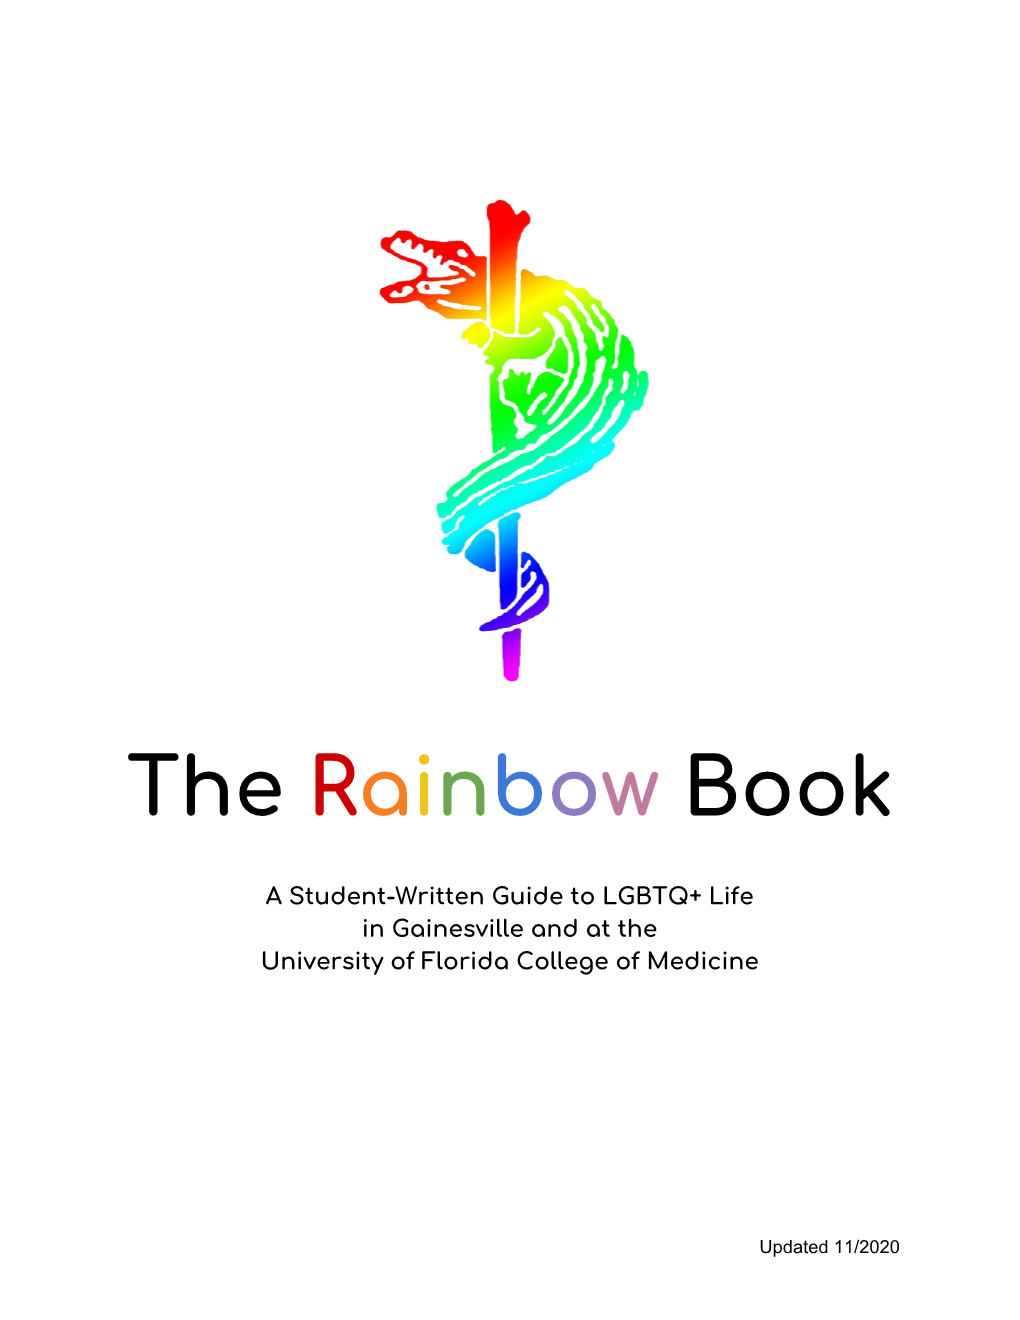 Rainbow Book ​ ​ ​ ​ ​ ​ ​ ​ a Student-Written Guide to LGBTQ+ Life in Gainesville and at the University of Florida College of Medicine